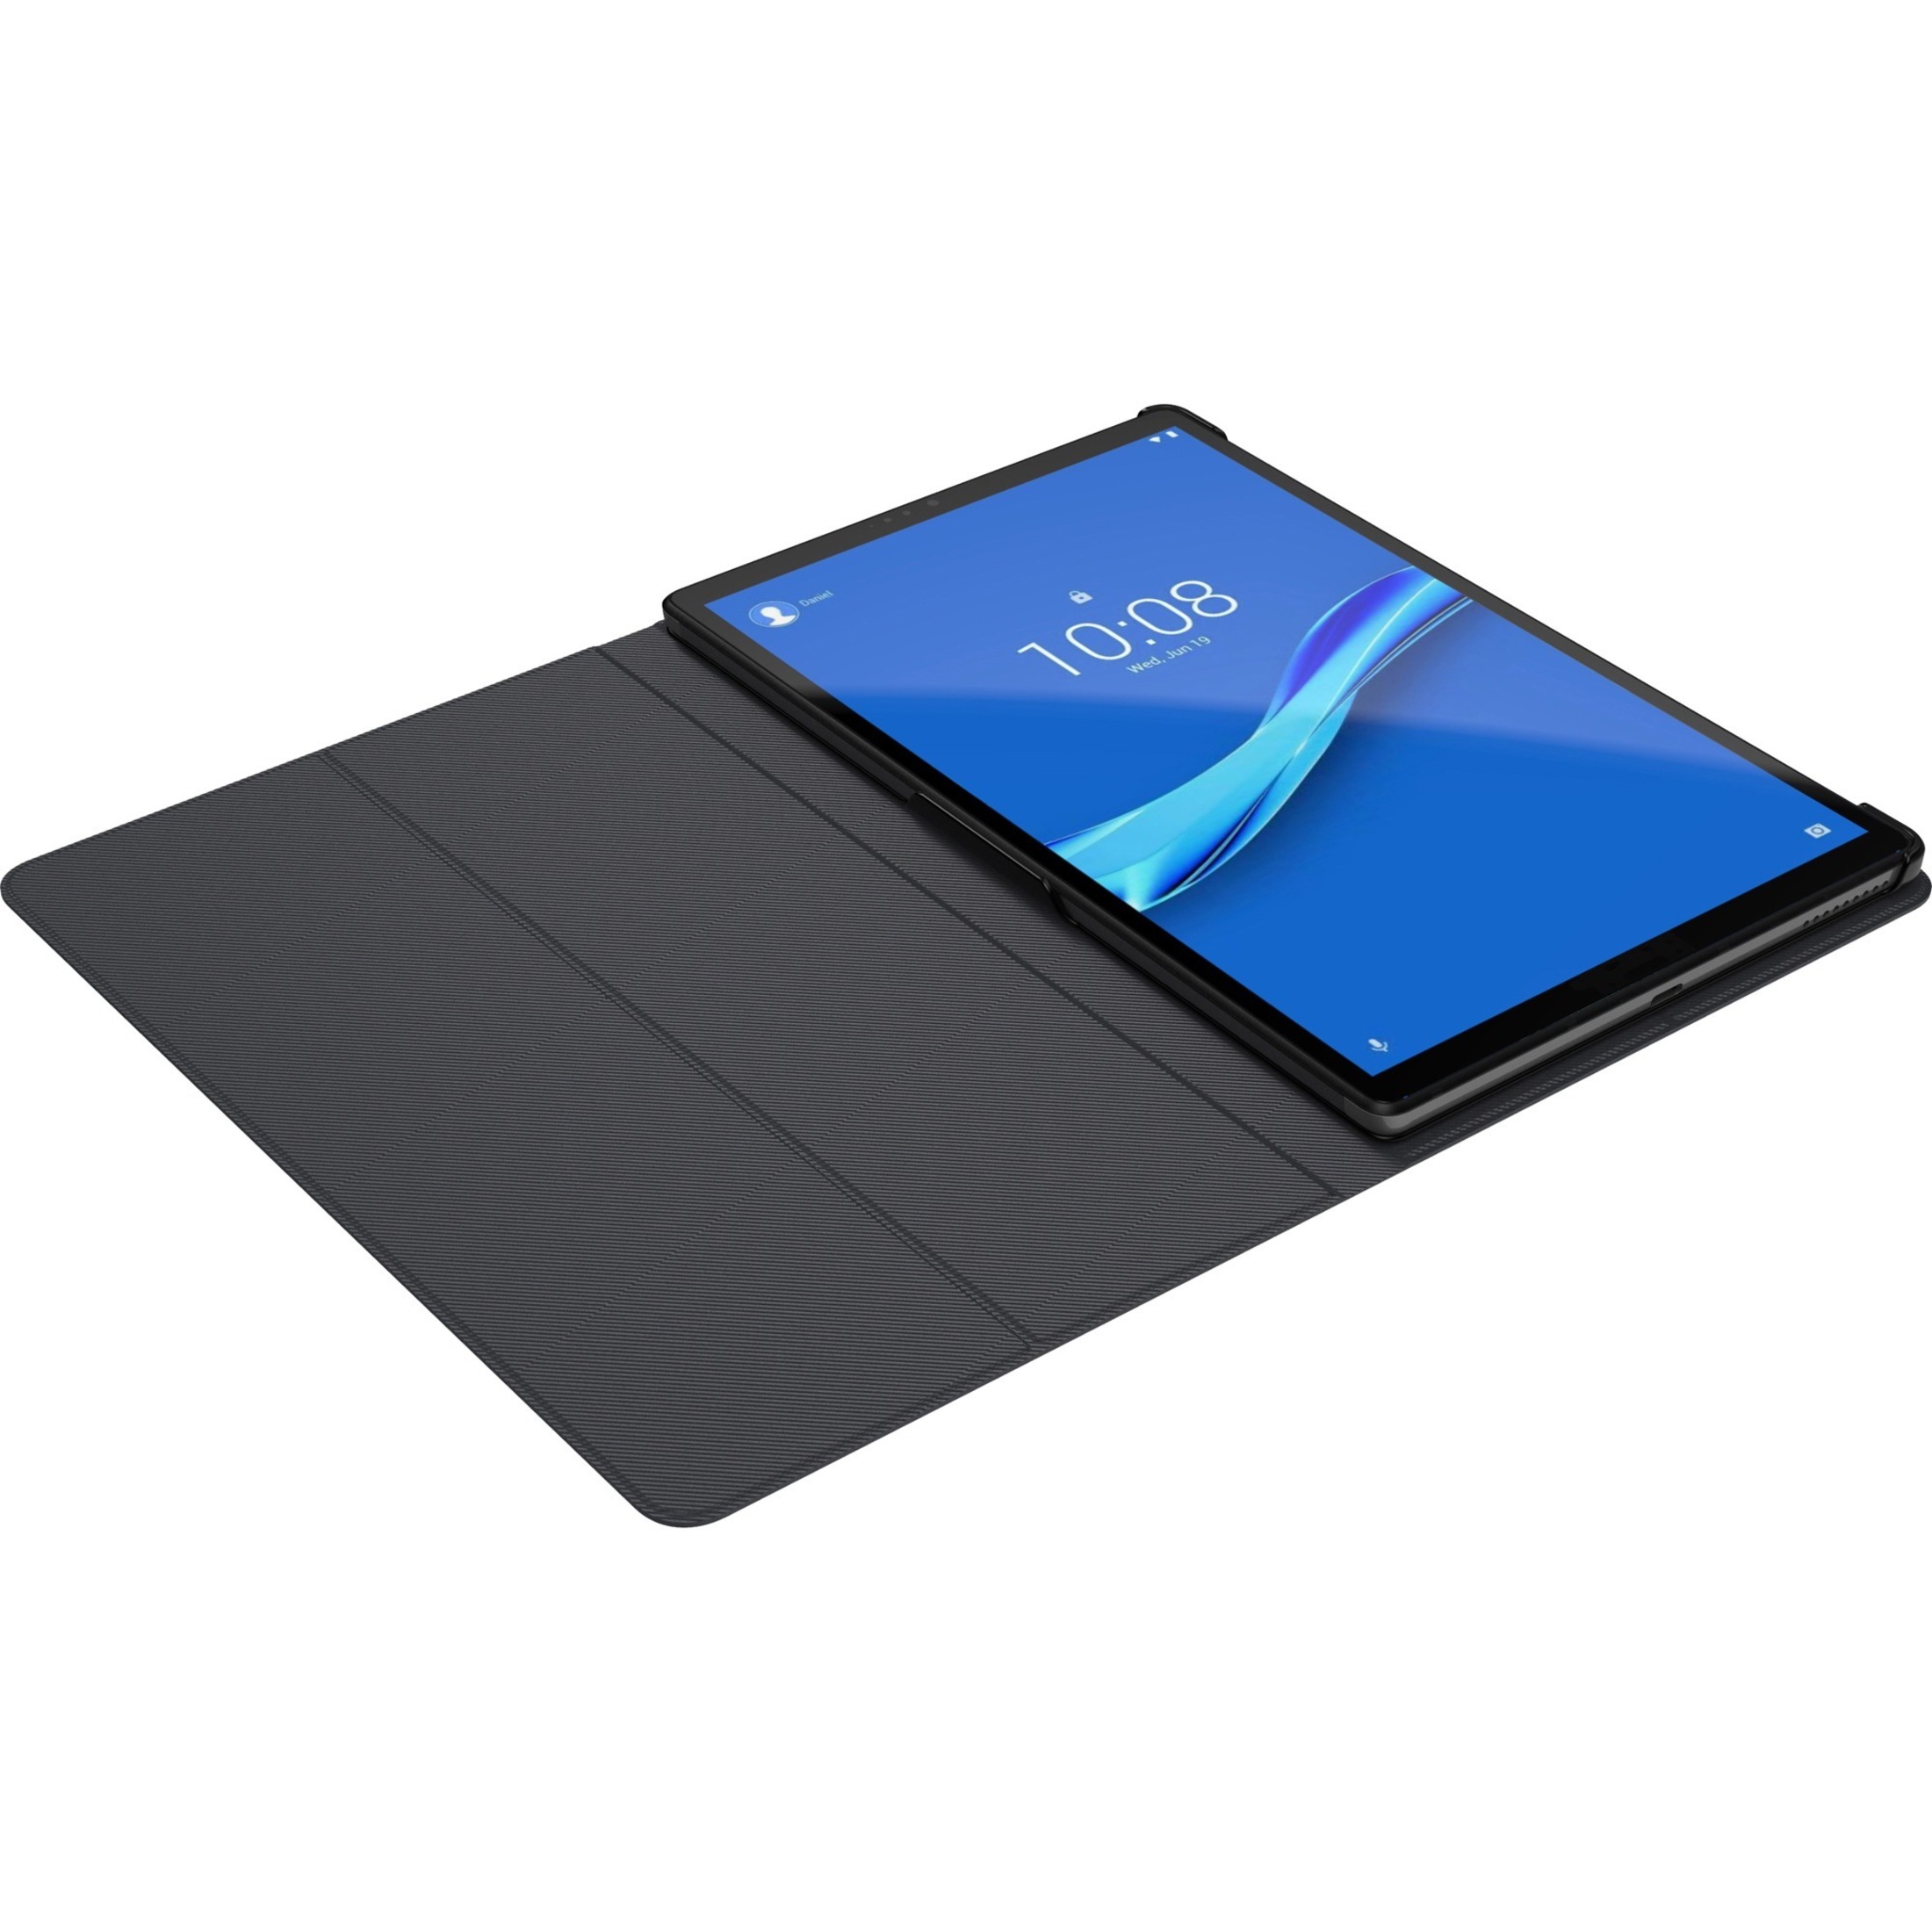 Lenovo Tab M10 10.3" Tablet - MediaTek Helio P22T - 4GB - 64GB FHD Plus with the Smart Charging Station - Android 9.0 (Pie) - image 21 of 33